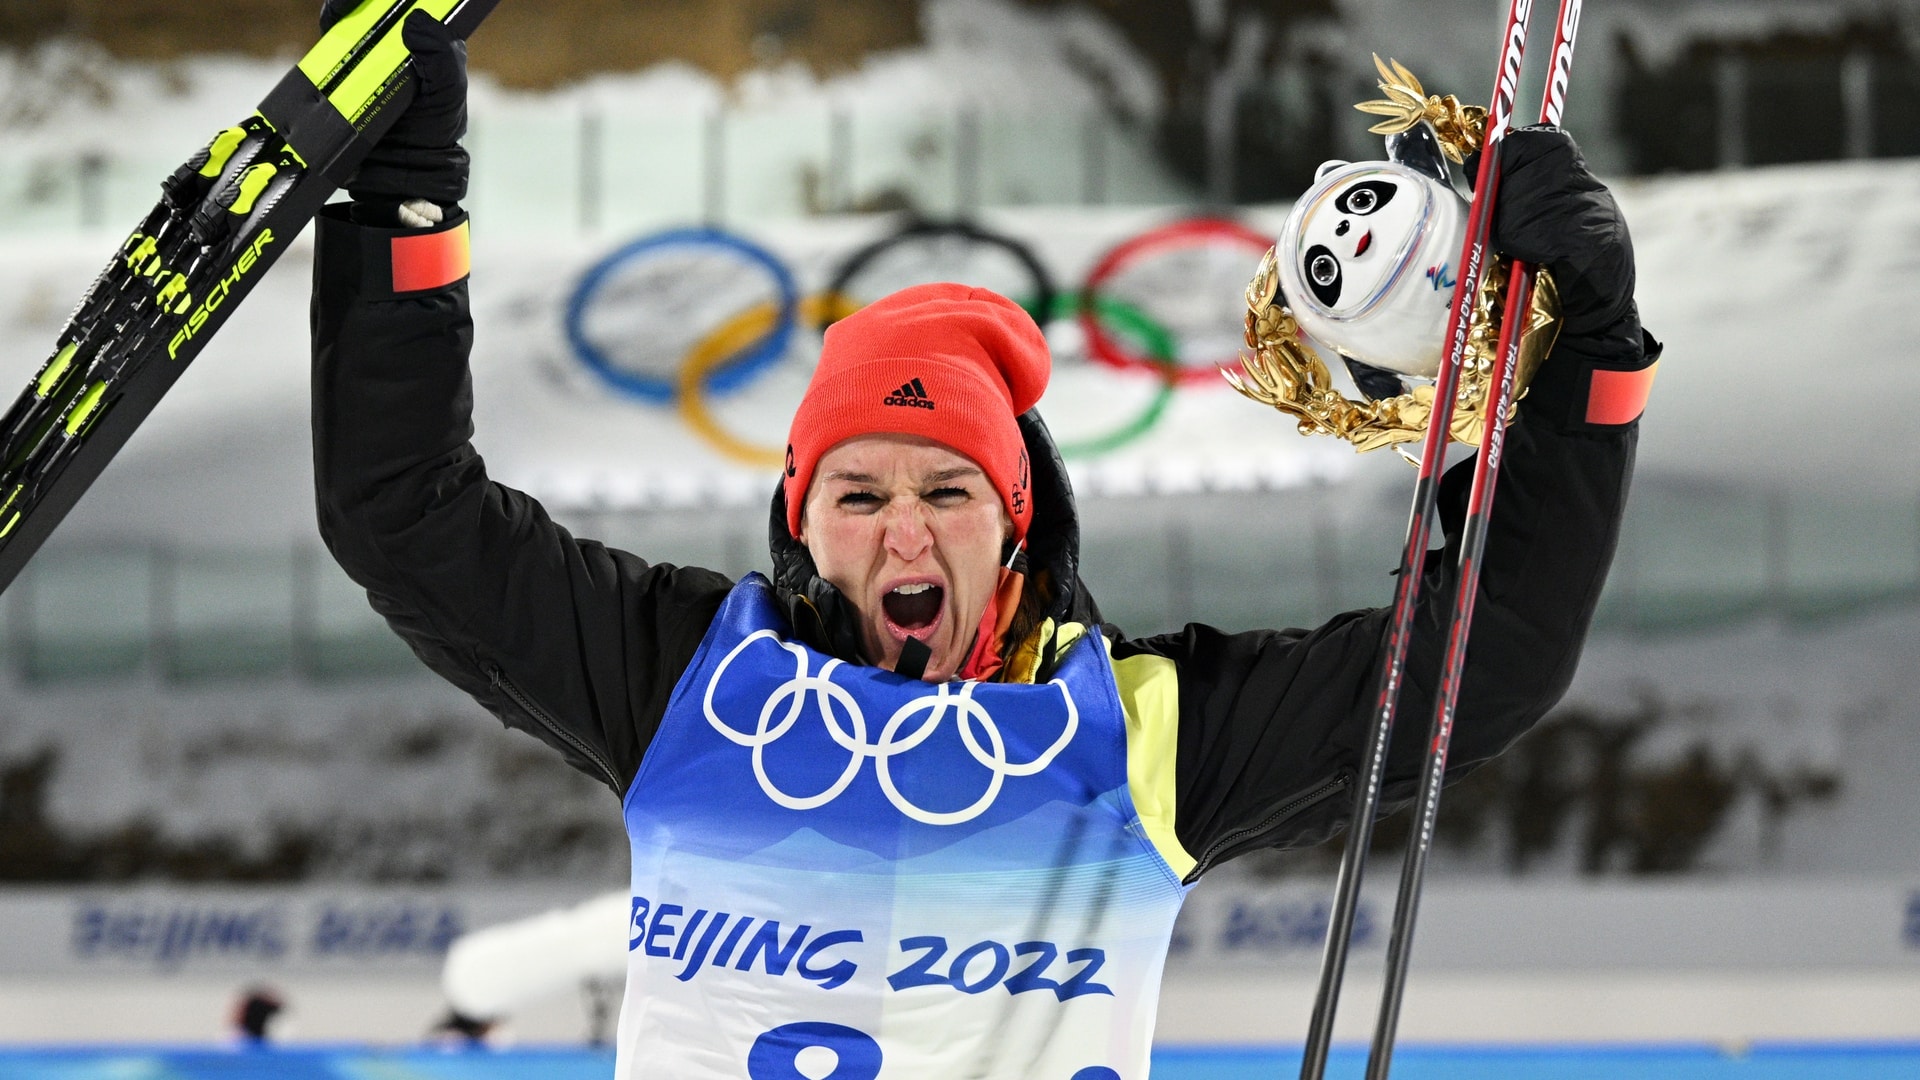 Germany Claims Gold in Womens Biathlon 15km Individual Event